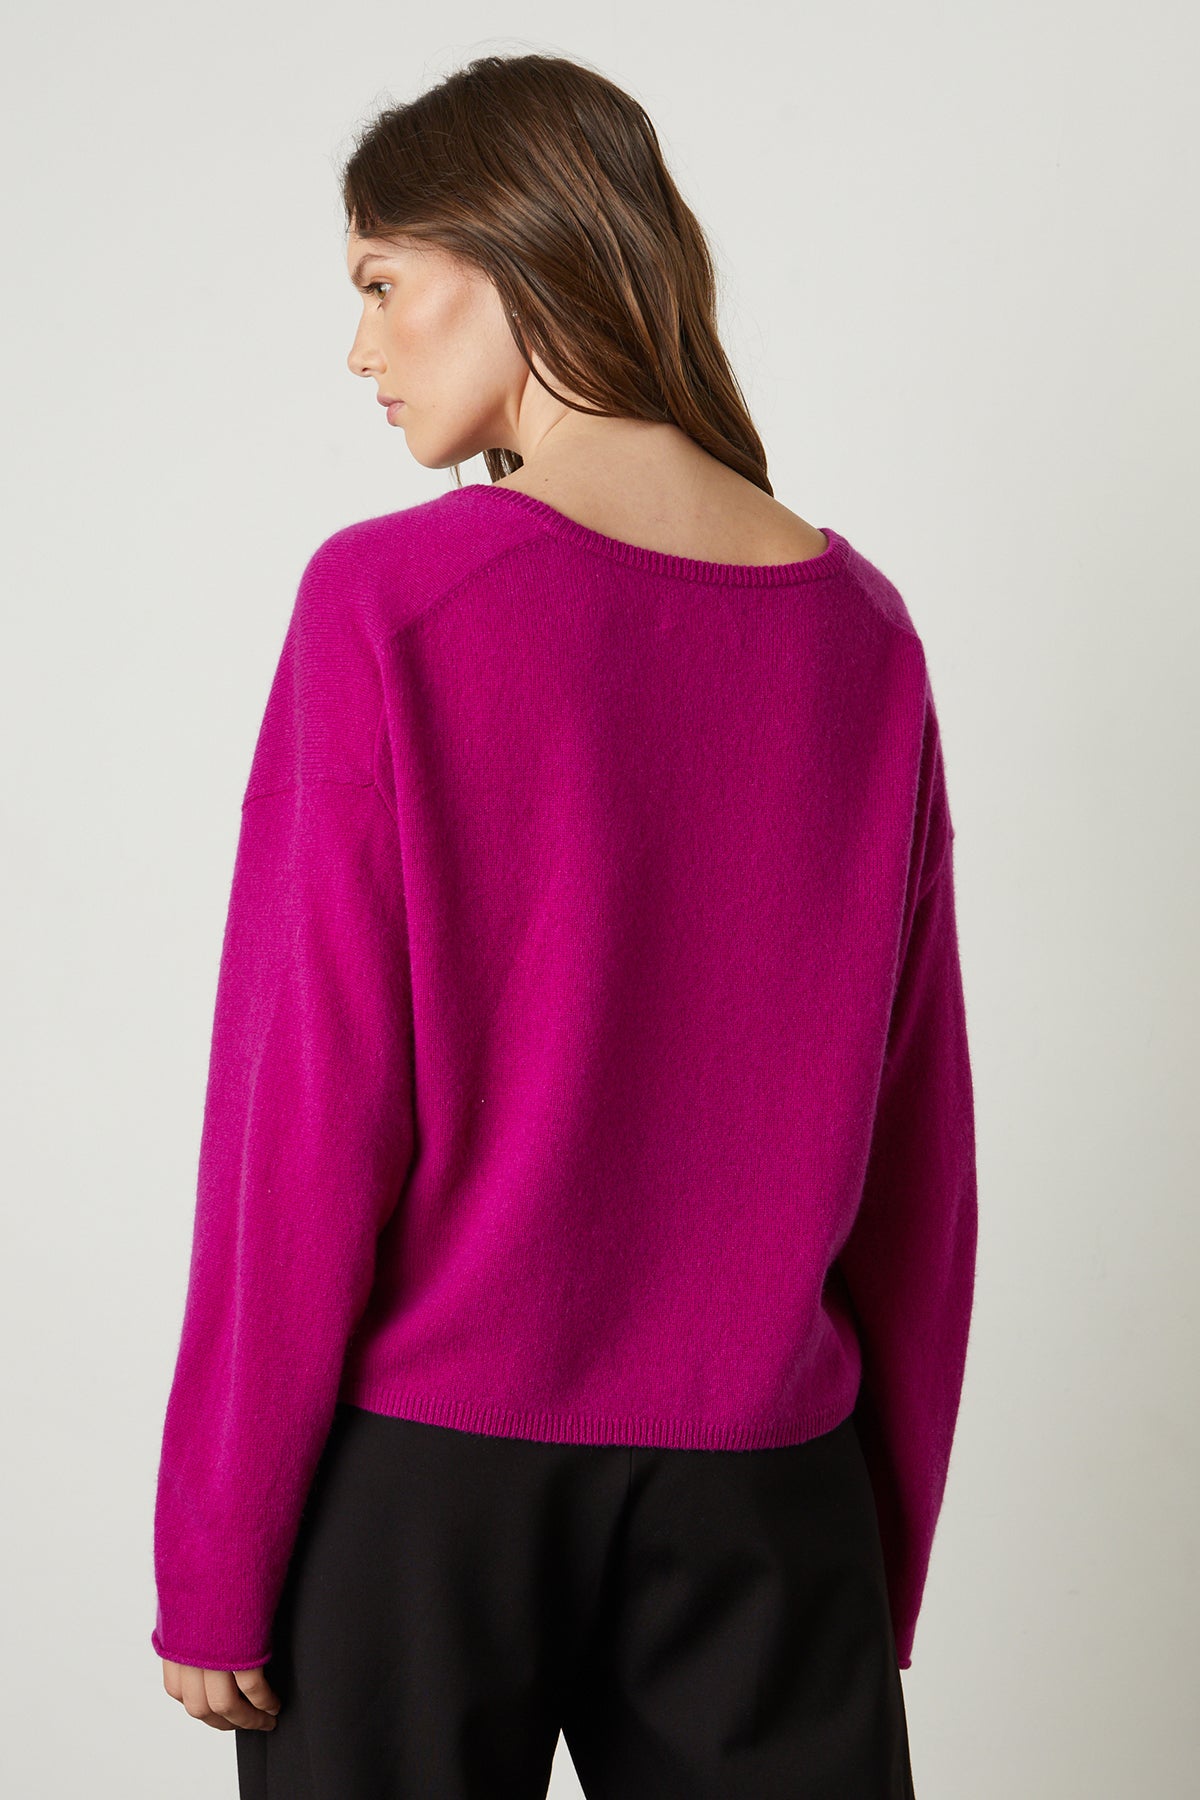 Amika Cashmere V-Neck Sweater in bright magenta pink with Leona pant back-25548550537409